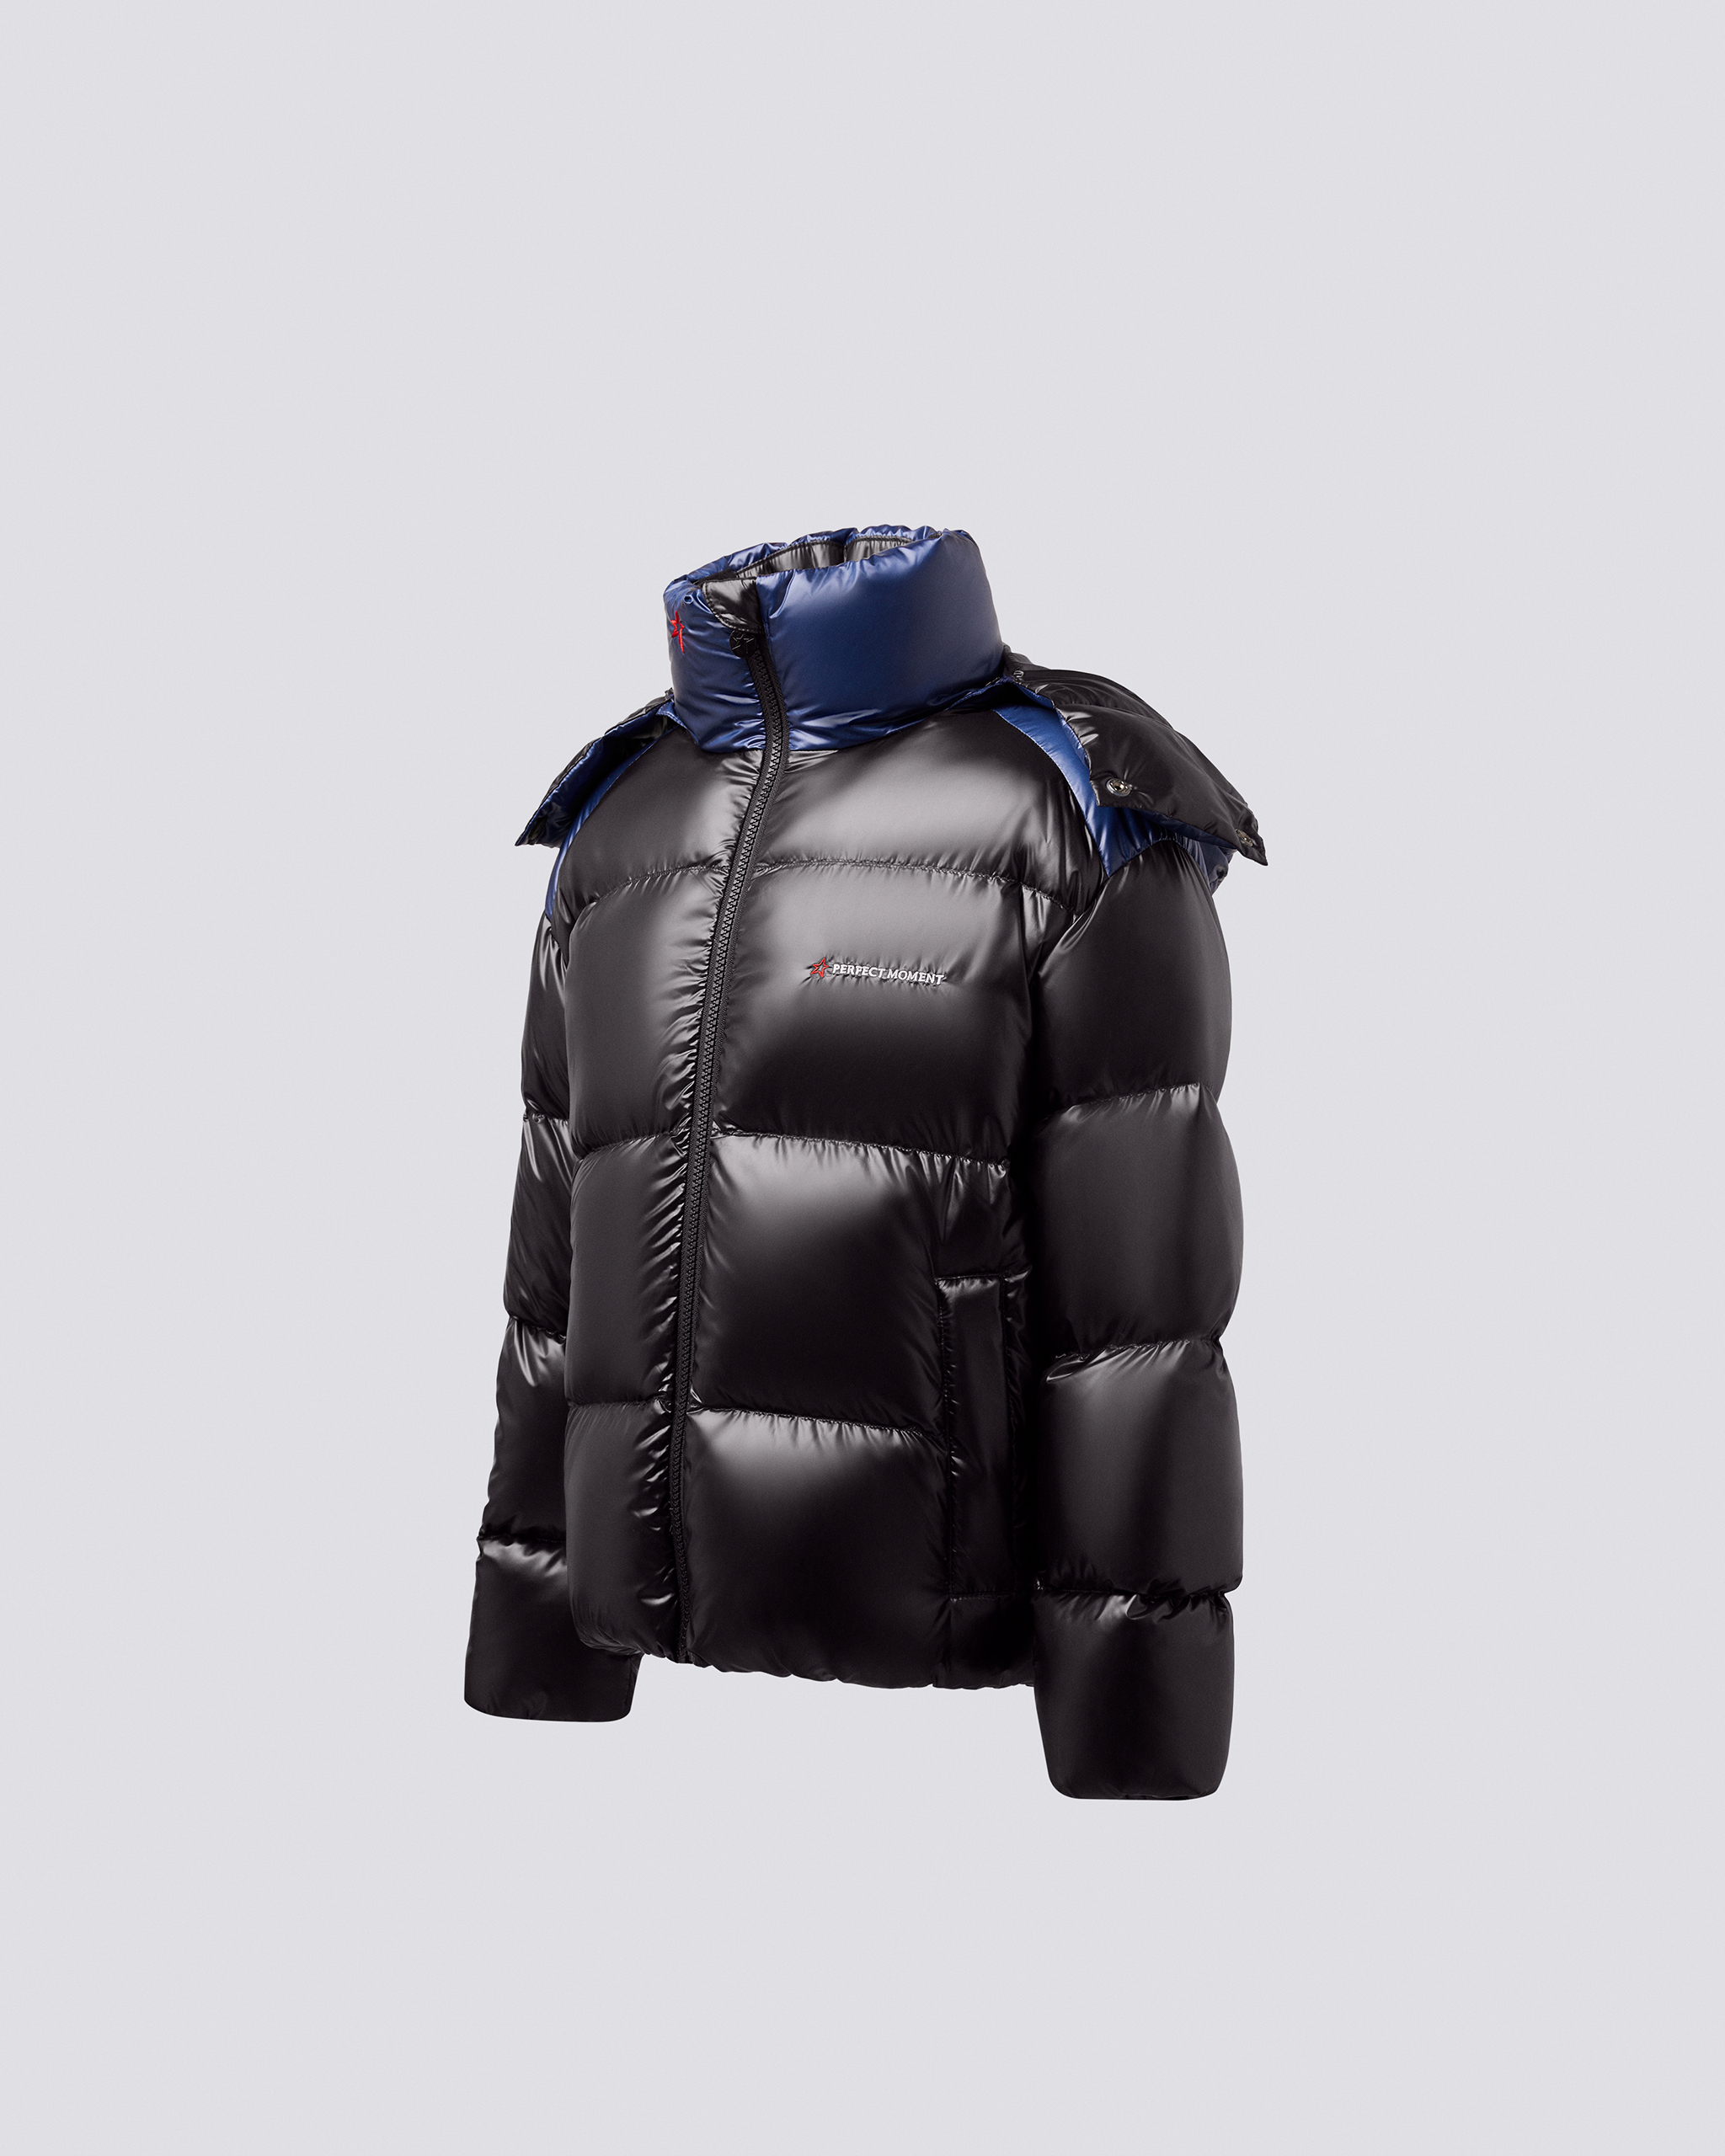 Perfect Moment Boyde Jacket Y6 In Black-navy